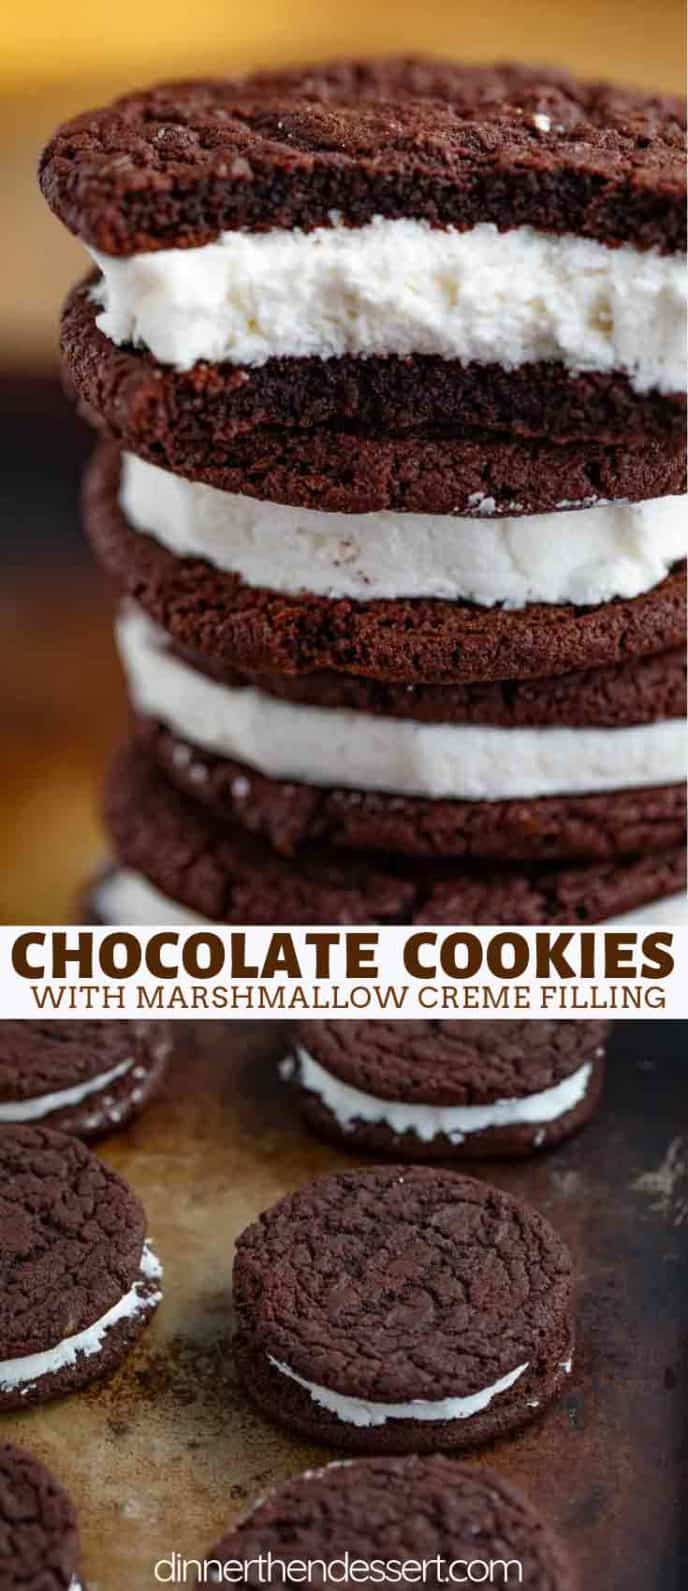 Chocolate Sandwich Cookies with creme filling